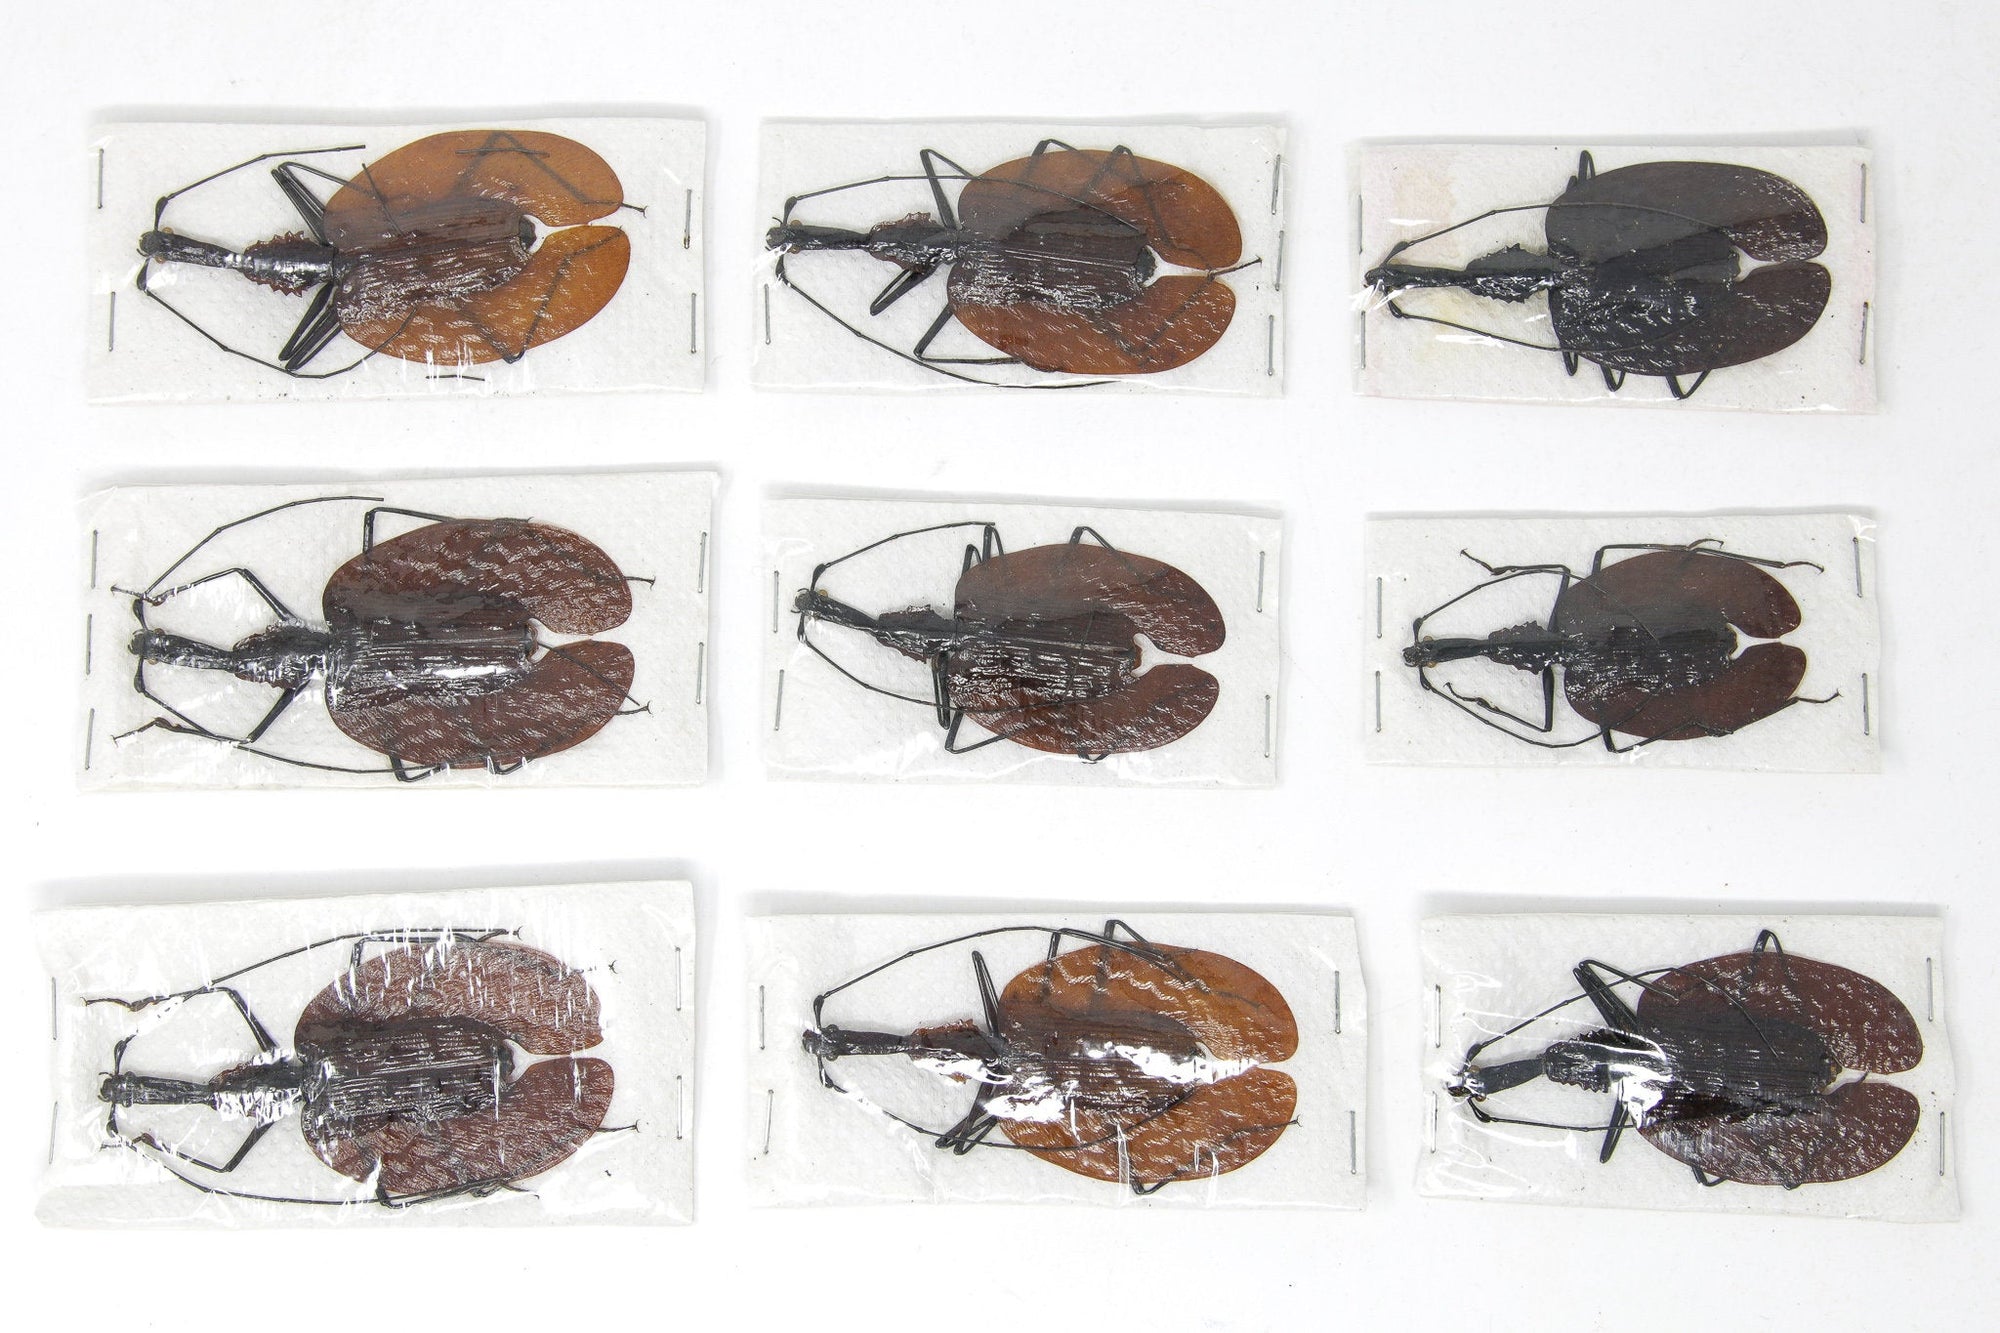 1 x Mormolyce phyllodes | A1 Unmounted Insect Specimens | Including Collection Data